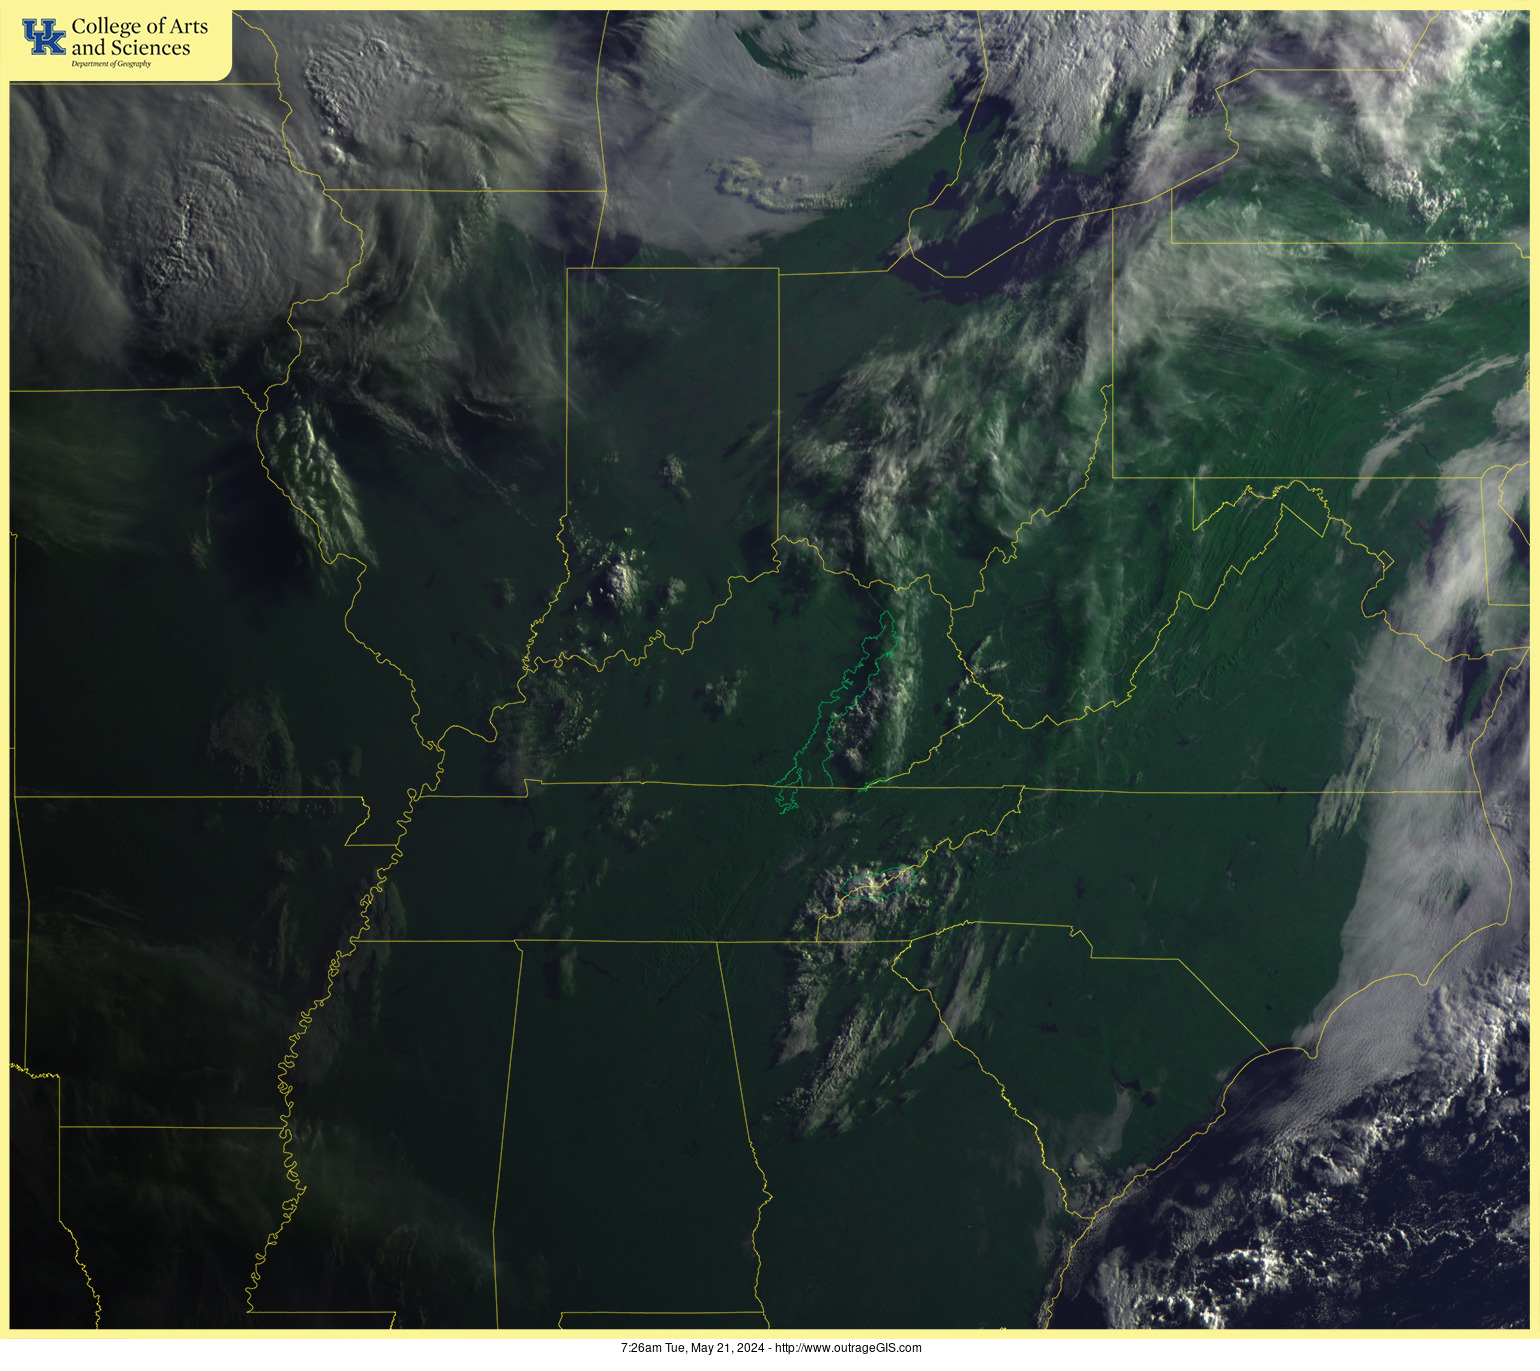 Current visible satellite for the Daniel Boone National Forest.